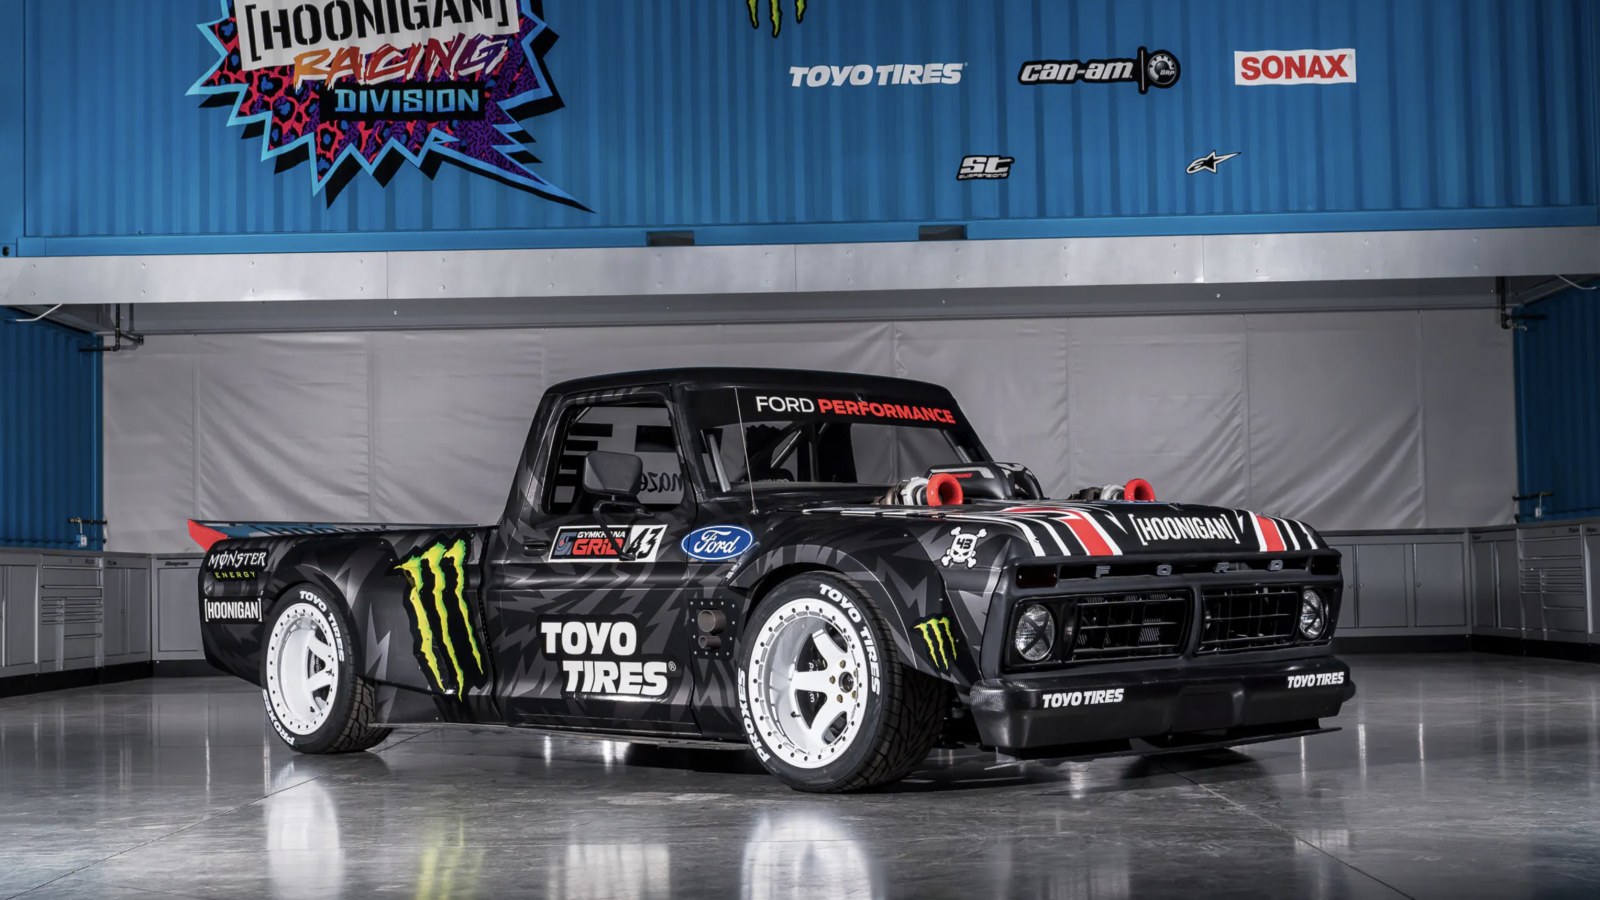 LBI Limited adds $1.1 million Hoonitruck to its Ken Block Collection